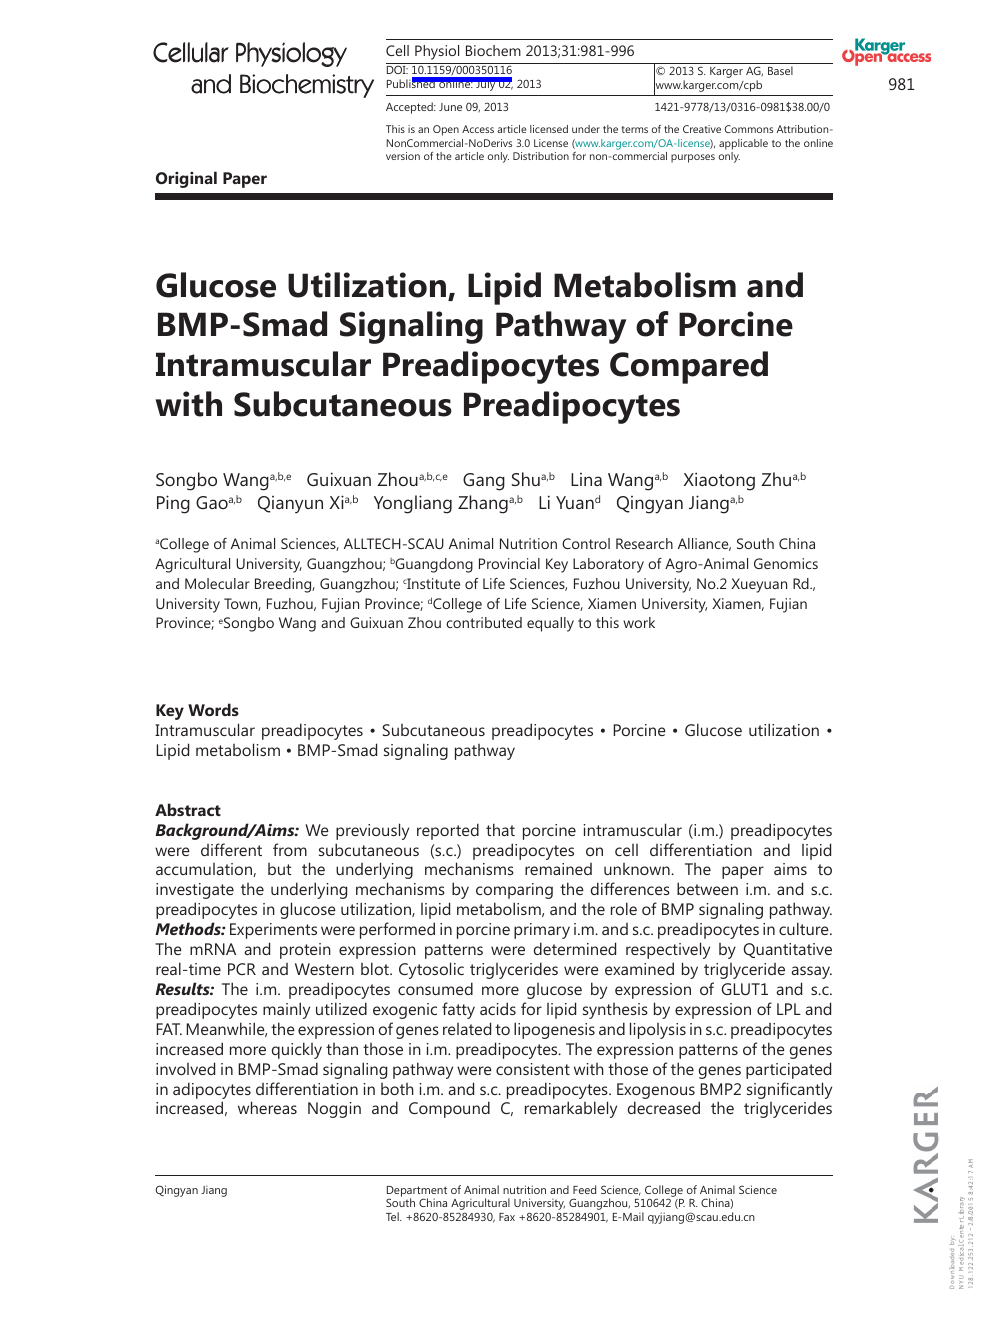 Glucose Utilization Lipid Metabolism And Bmp Smad Signaling Pathway Of Porcine Intramuscular Preadipocytes Compared With Subcutaneous Preadipocytes Topic Of Research Paper In Biological Sciences Download Scholarly Article Pdf And Read For Free